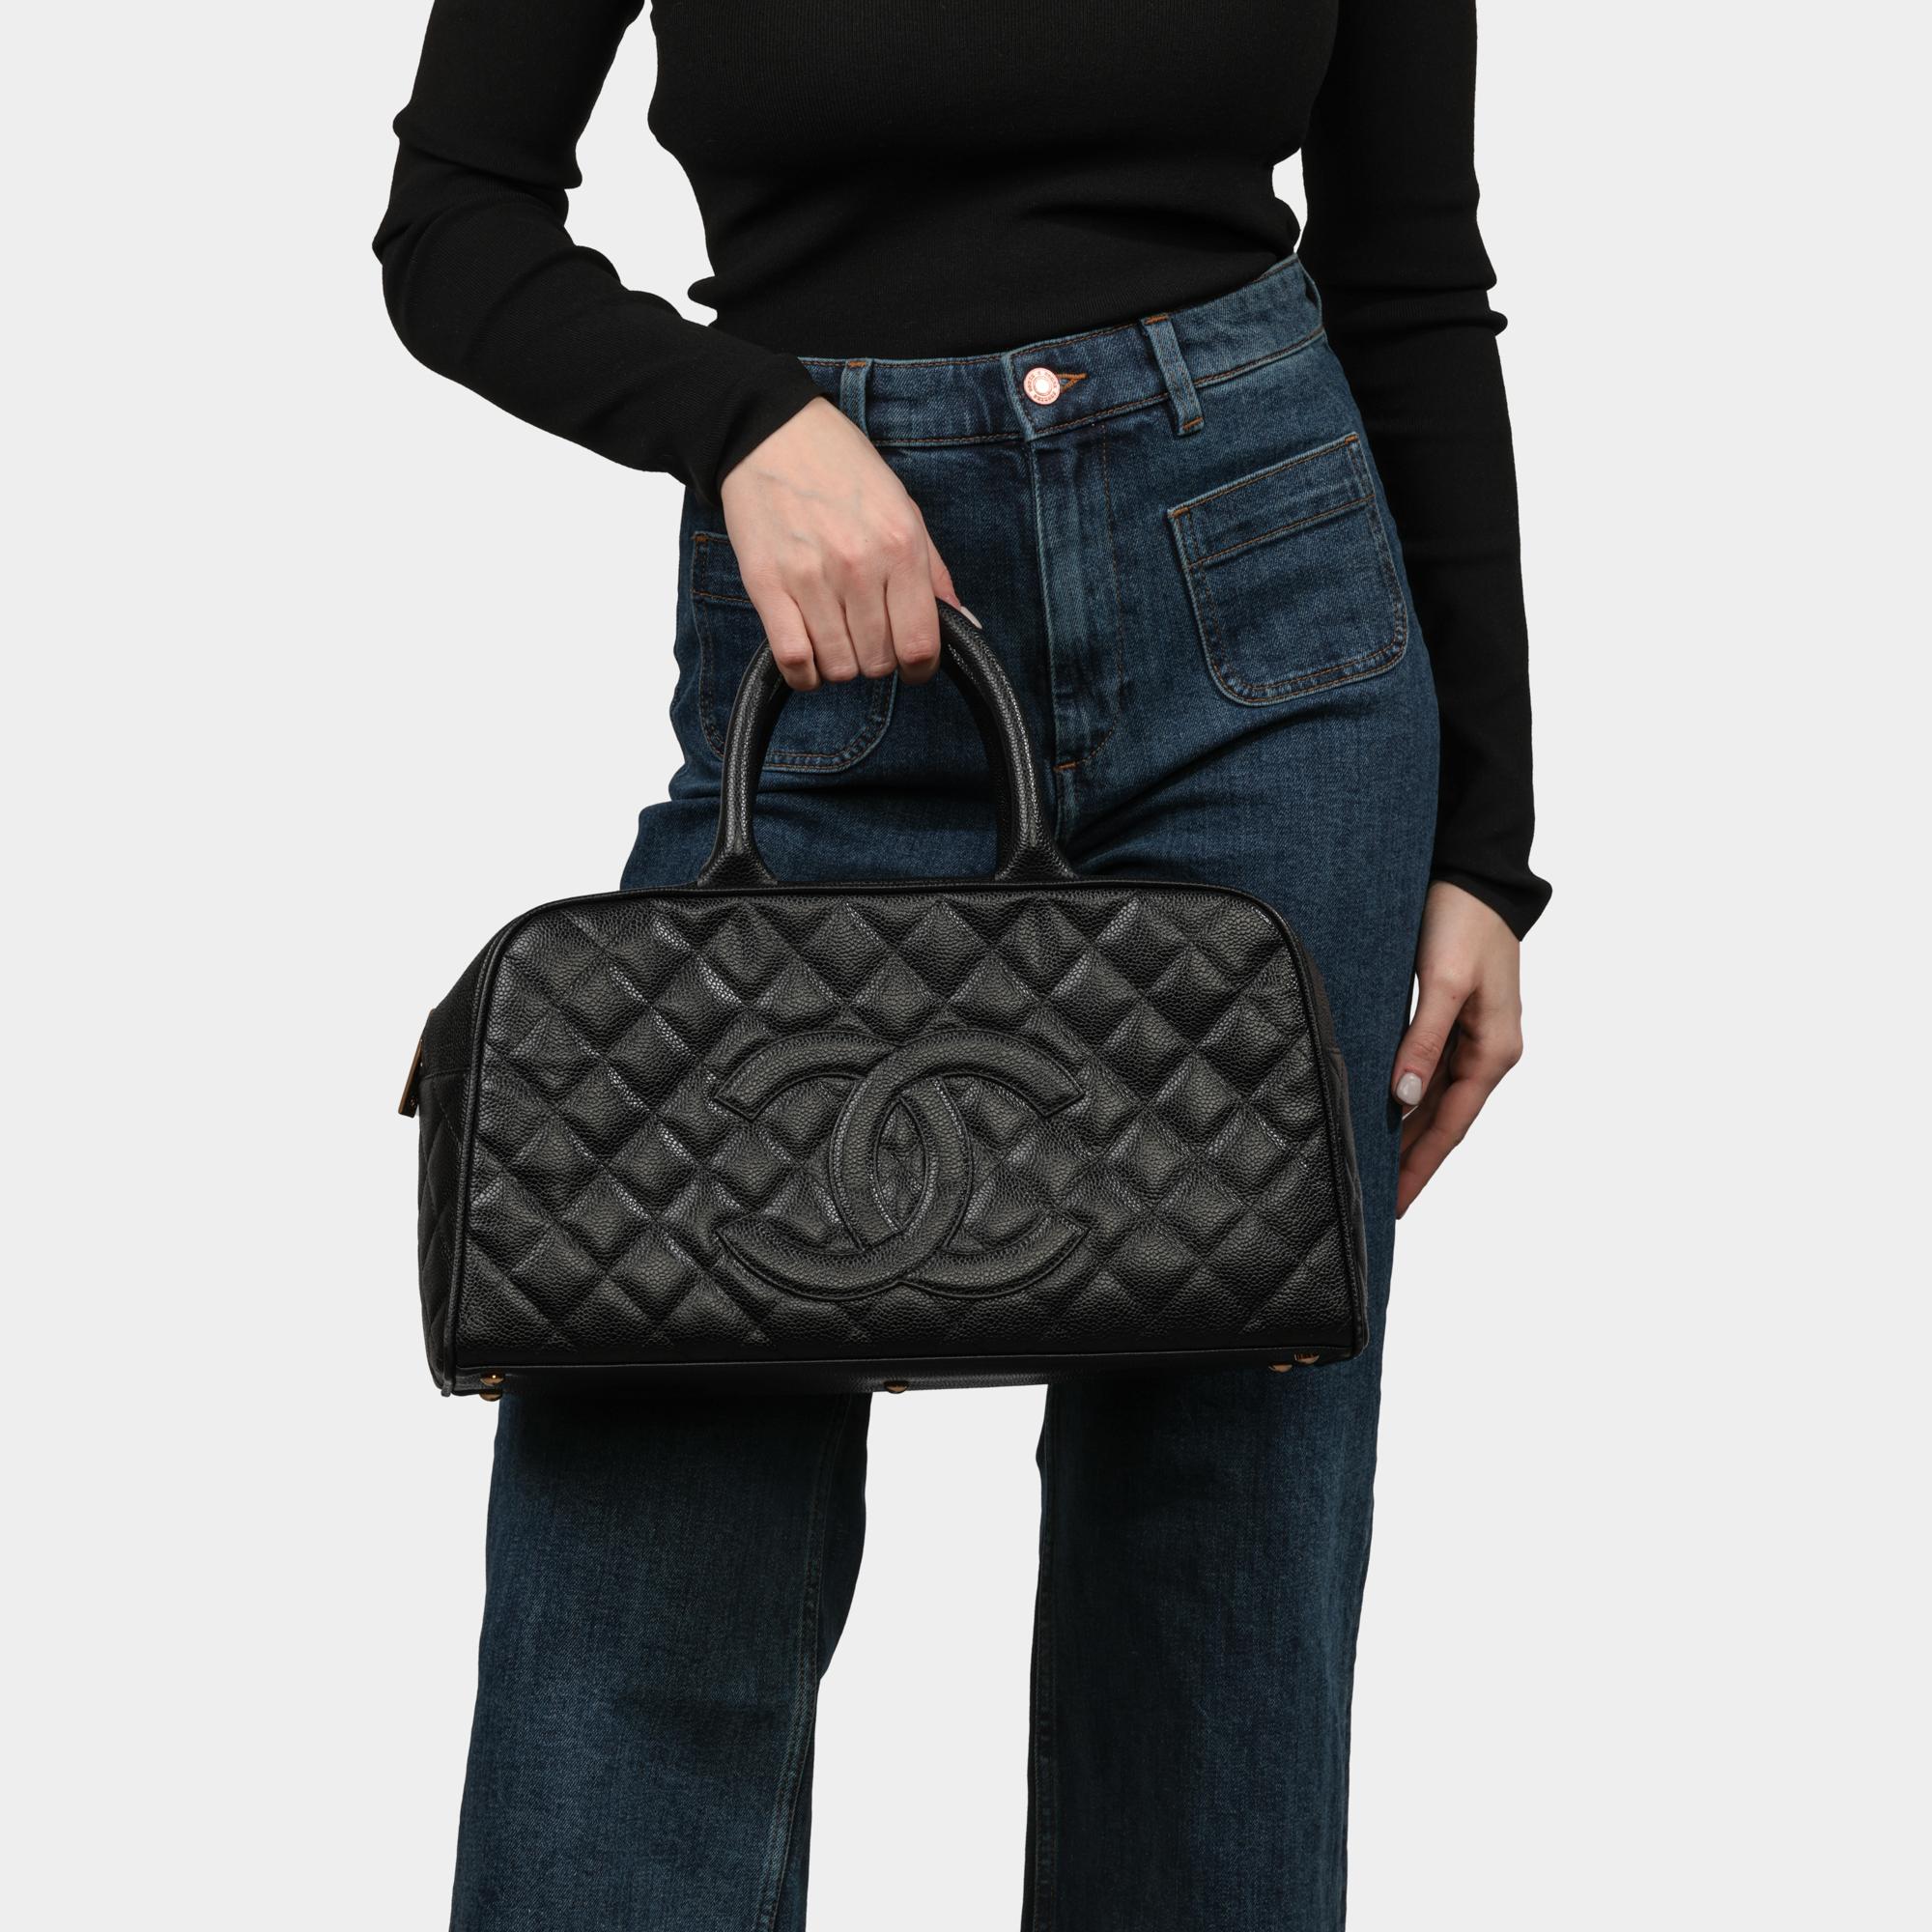 CHANEL Black Quilted Caviar Leather Boston Bag 7